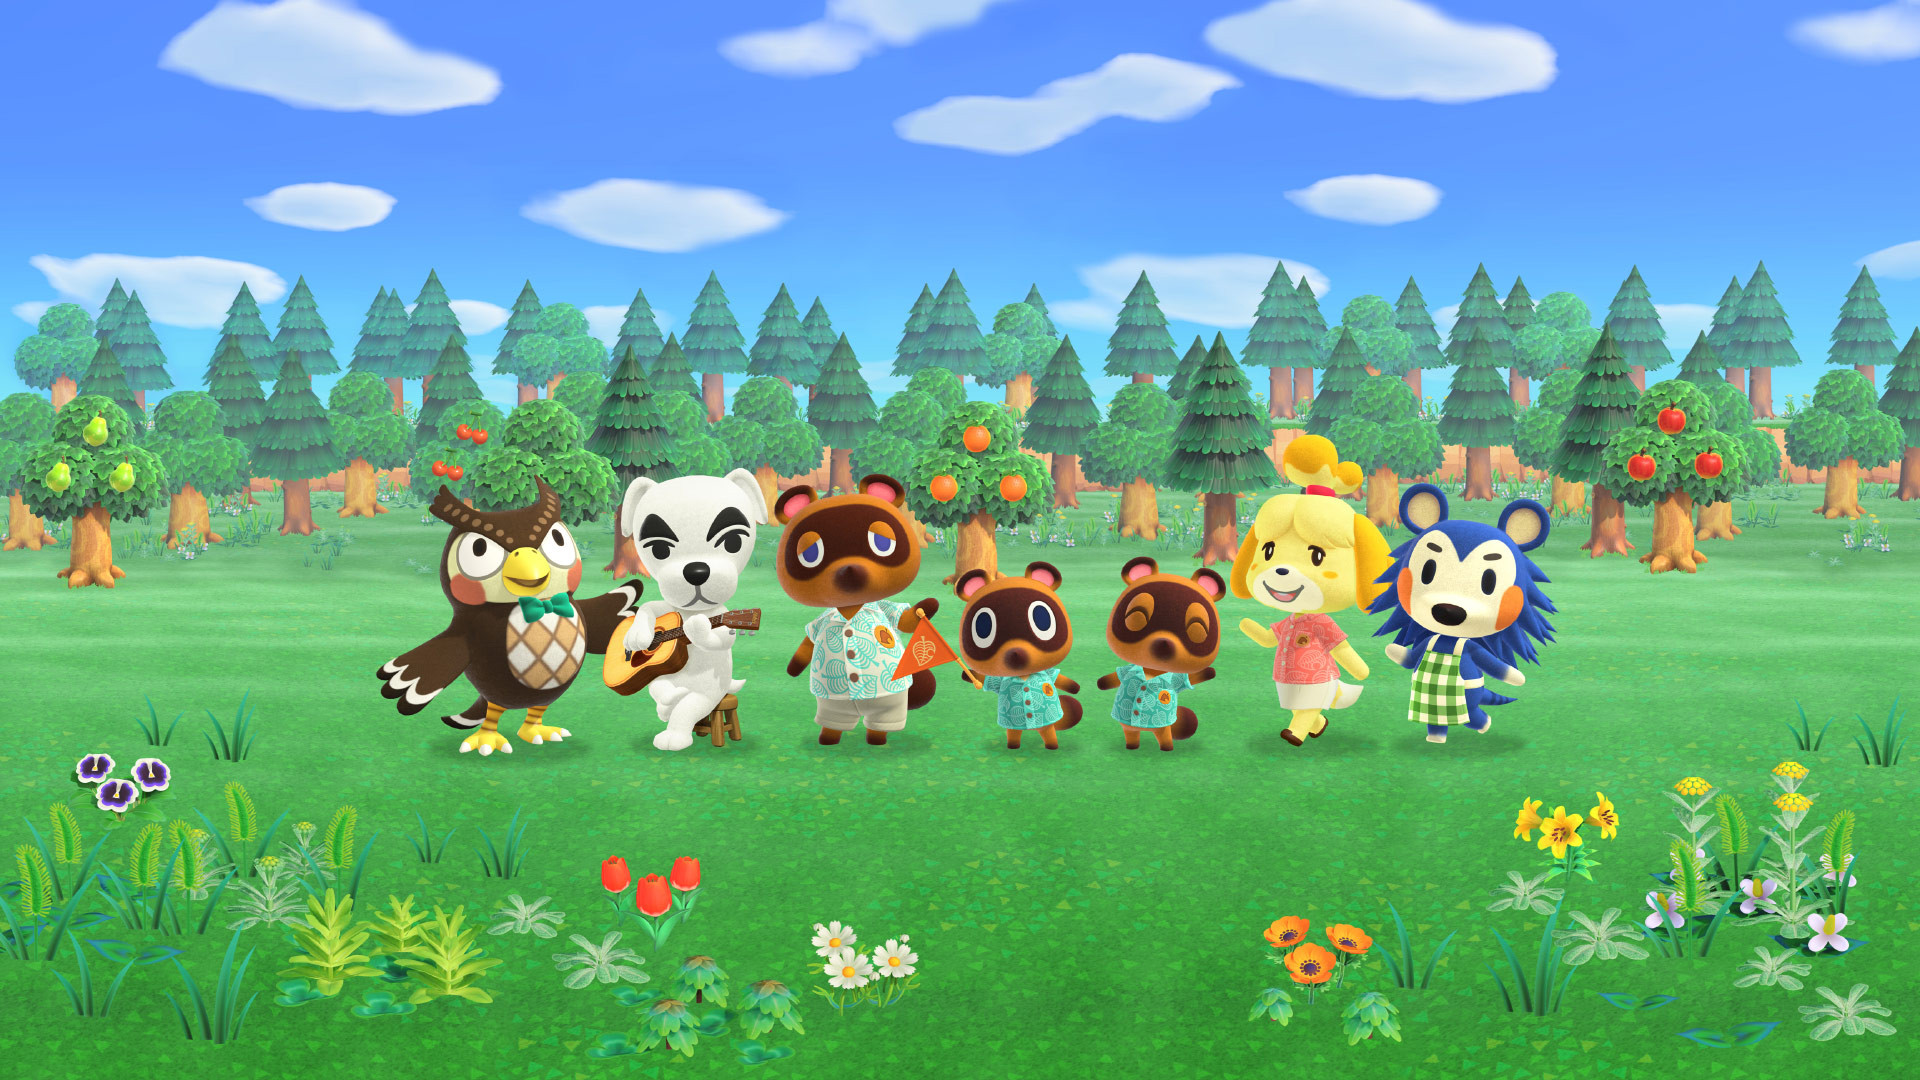 Fake Animal Crossing New Horizons for PC Is Literally About